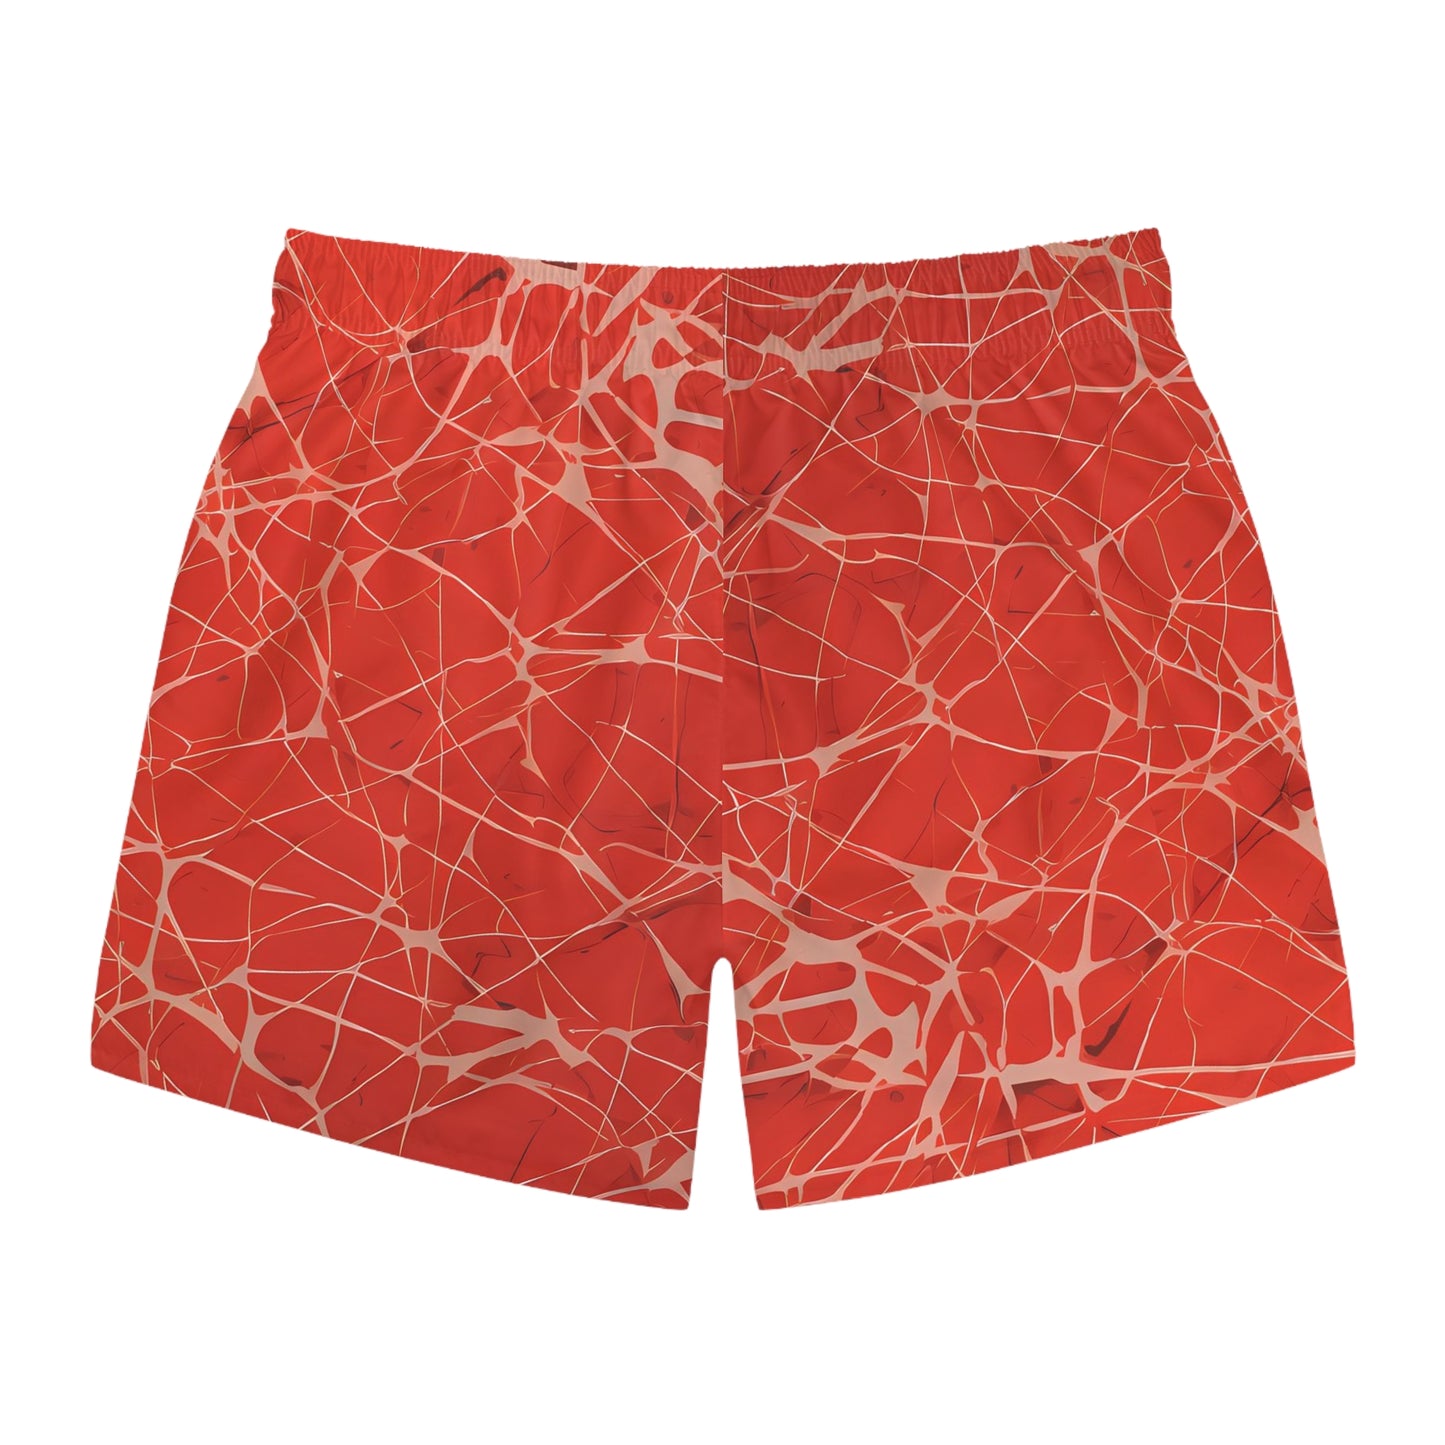 Red Fractured Swim Trunks